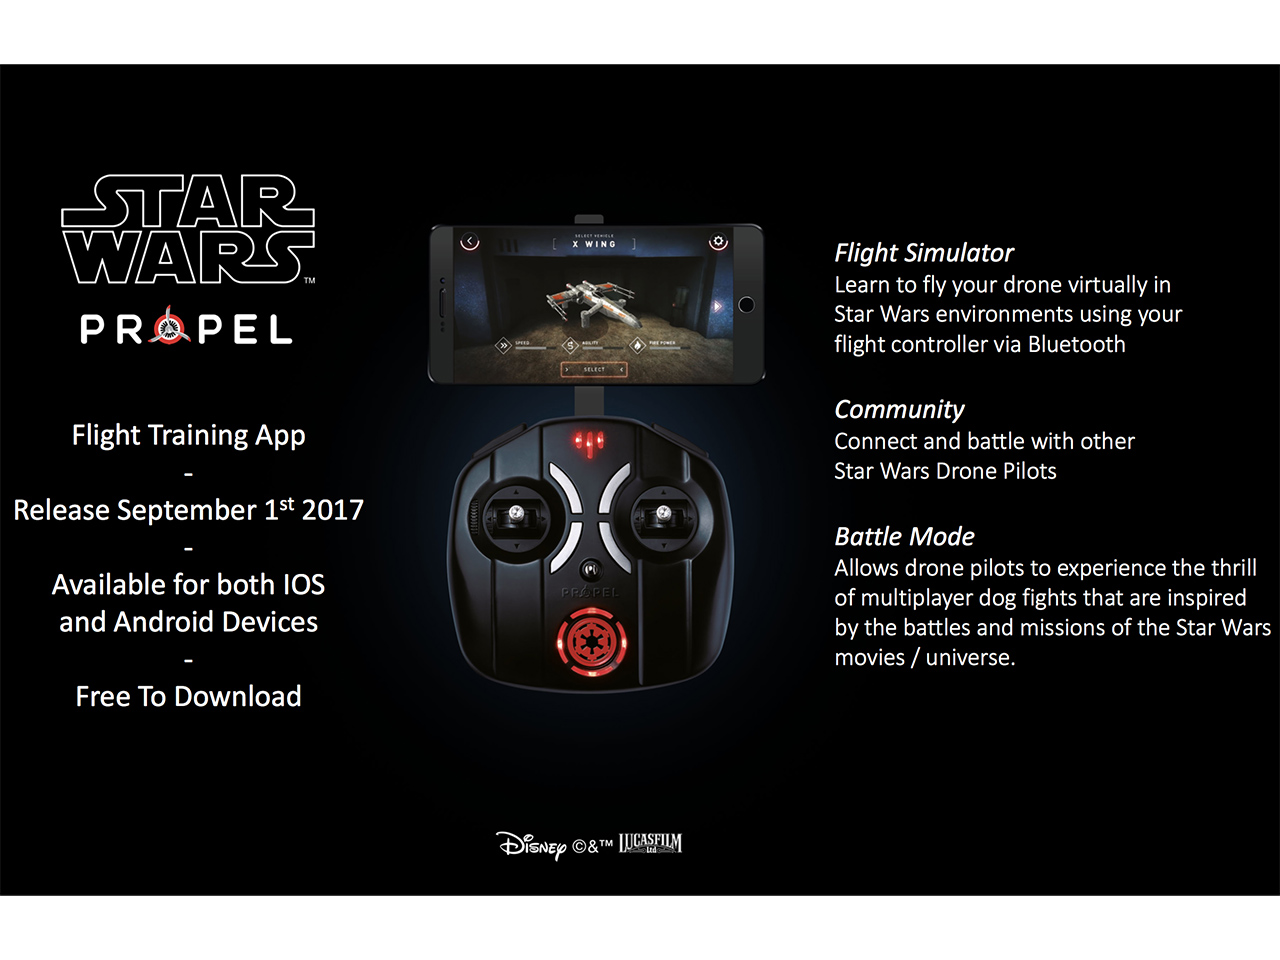 Star Wars drones training app with controller attachment